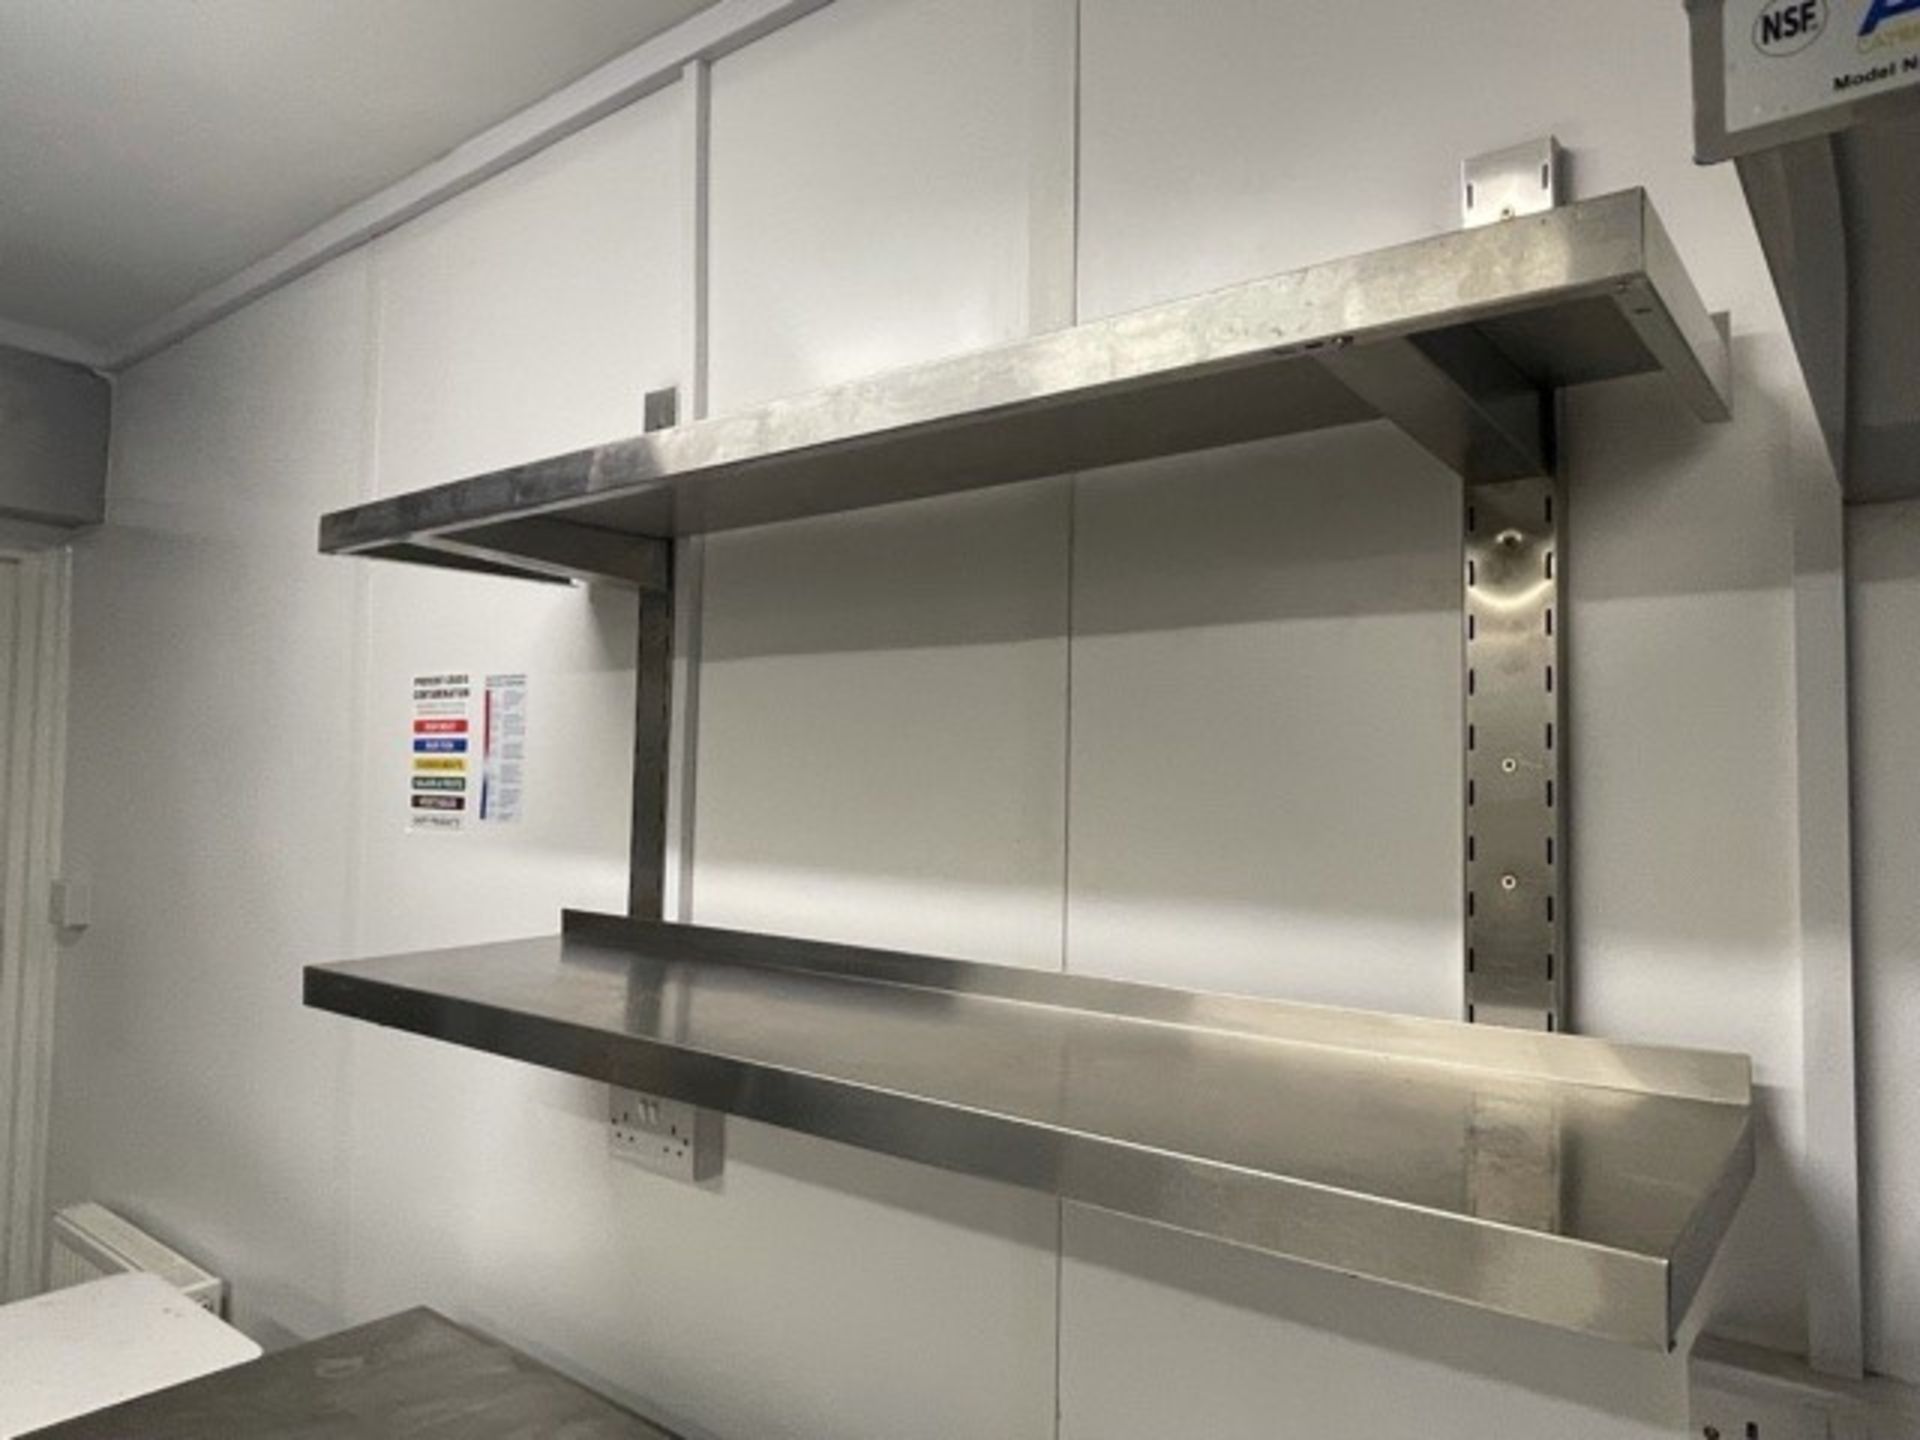 Stainless Steel Wall Shelf 2 Levels - Image 2 of 3